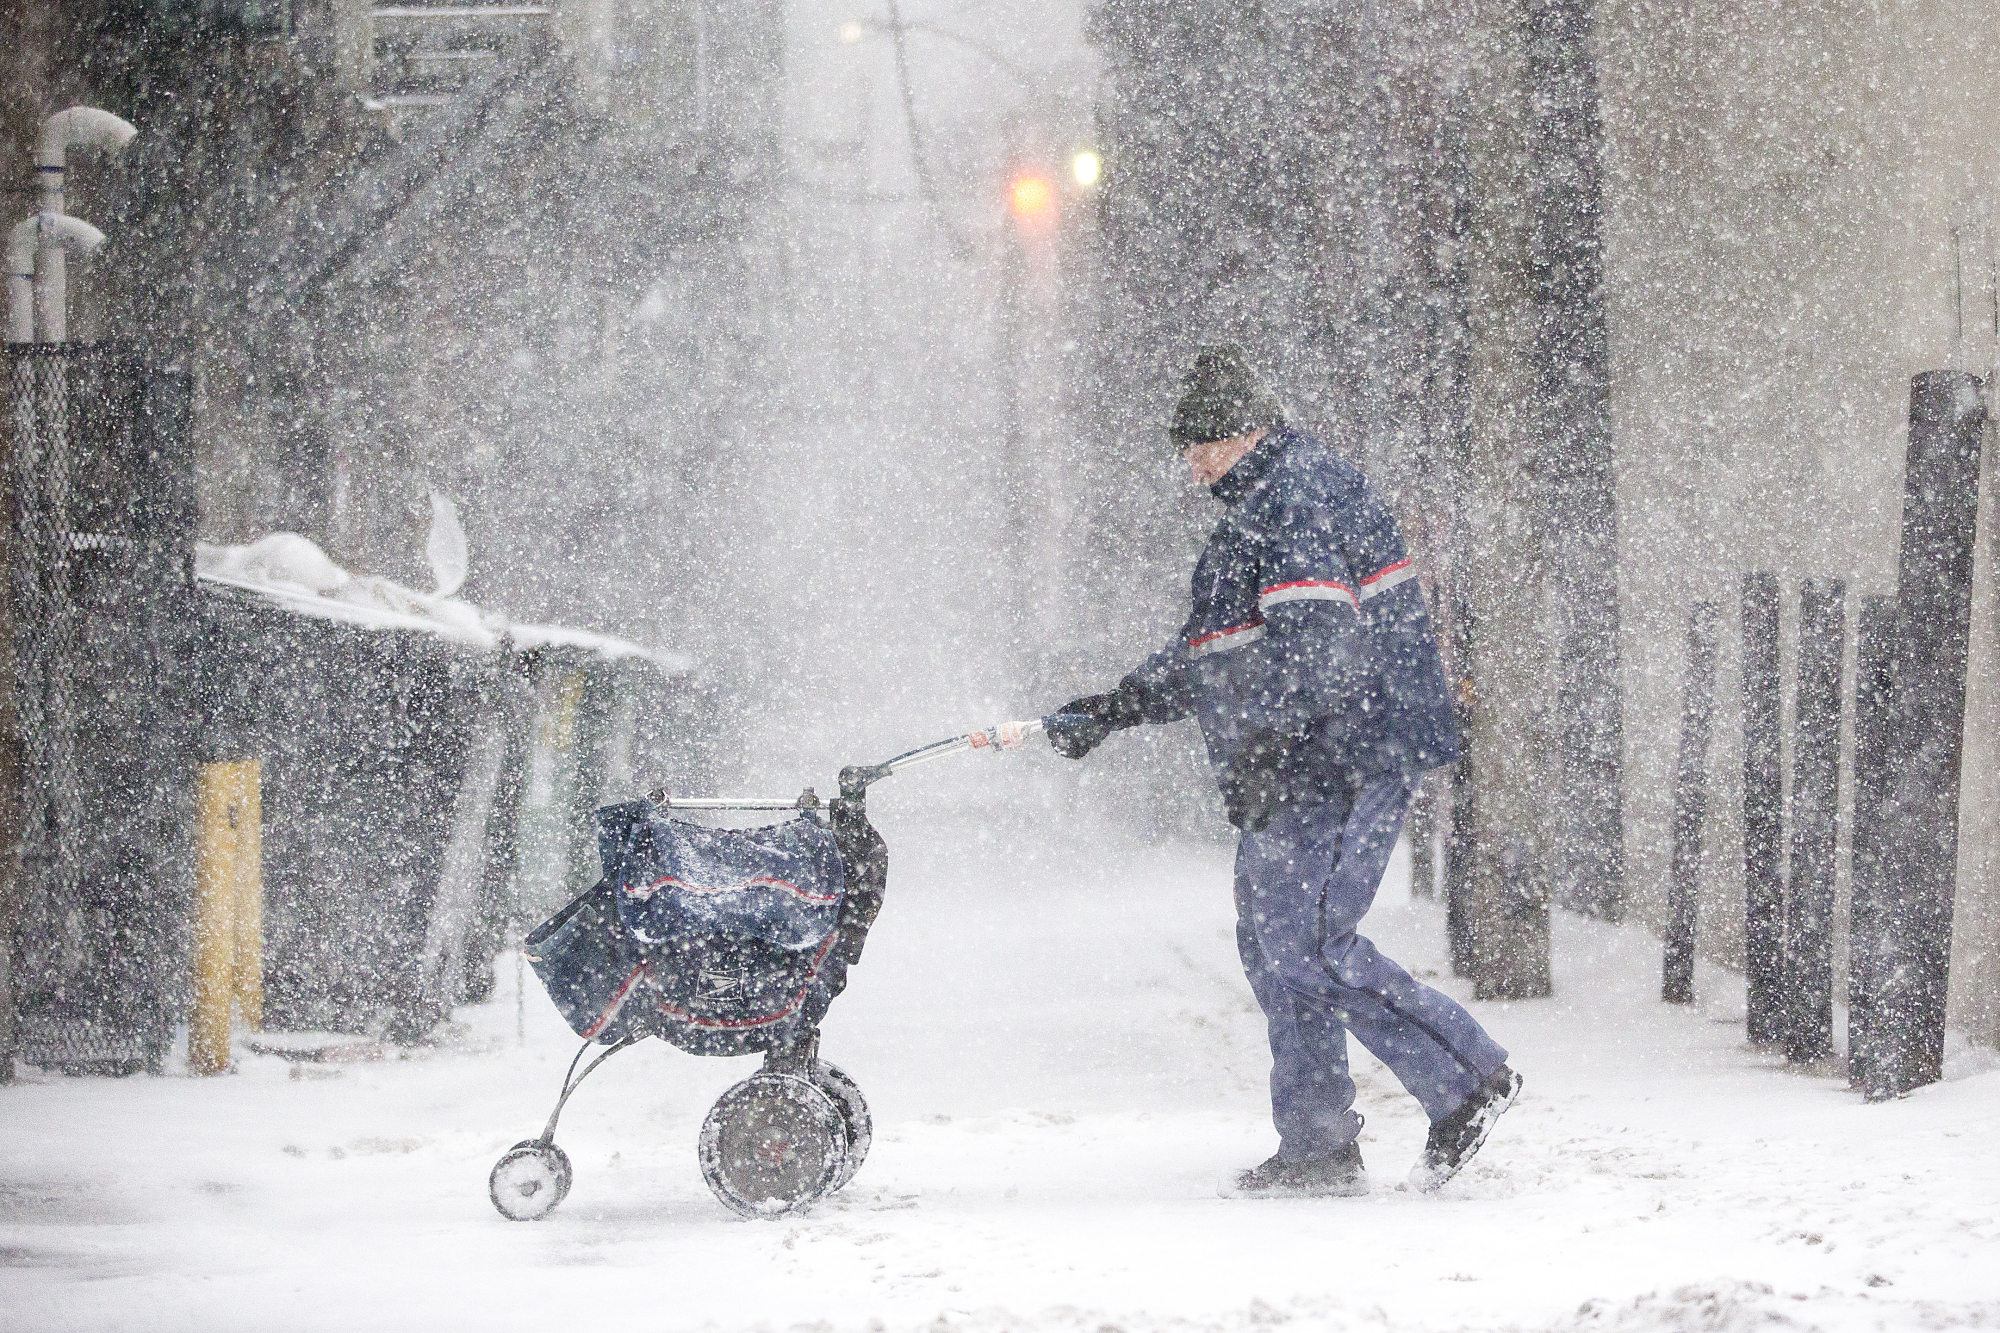 A United States Postal Service letter carrier delivers mail during a snow storm.